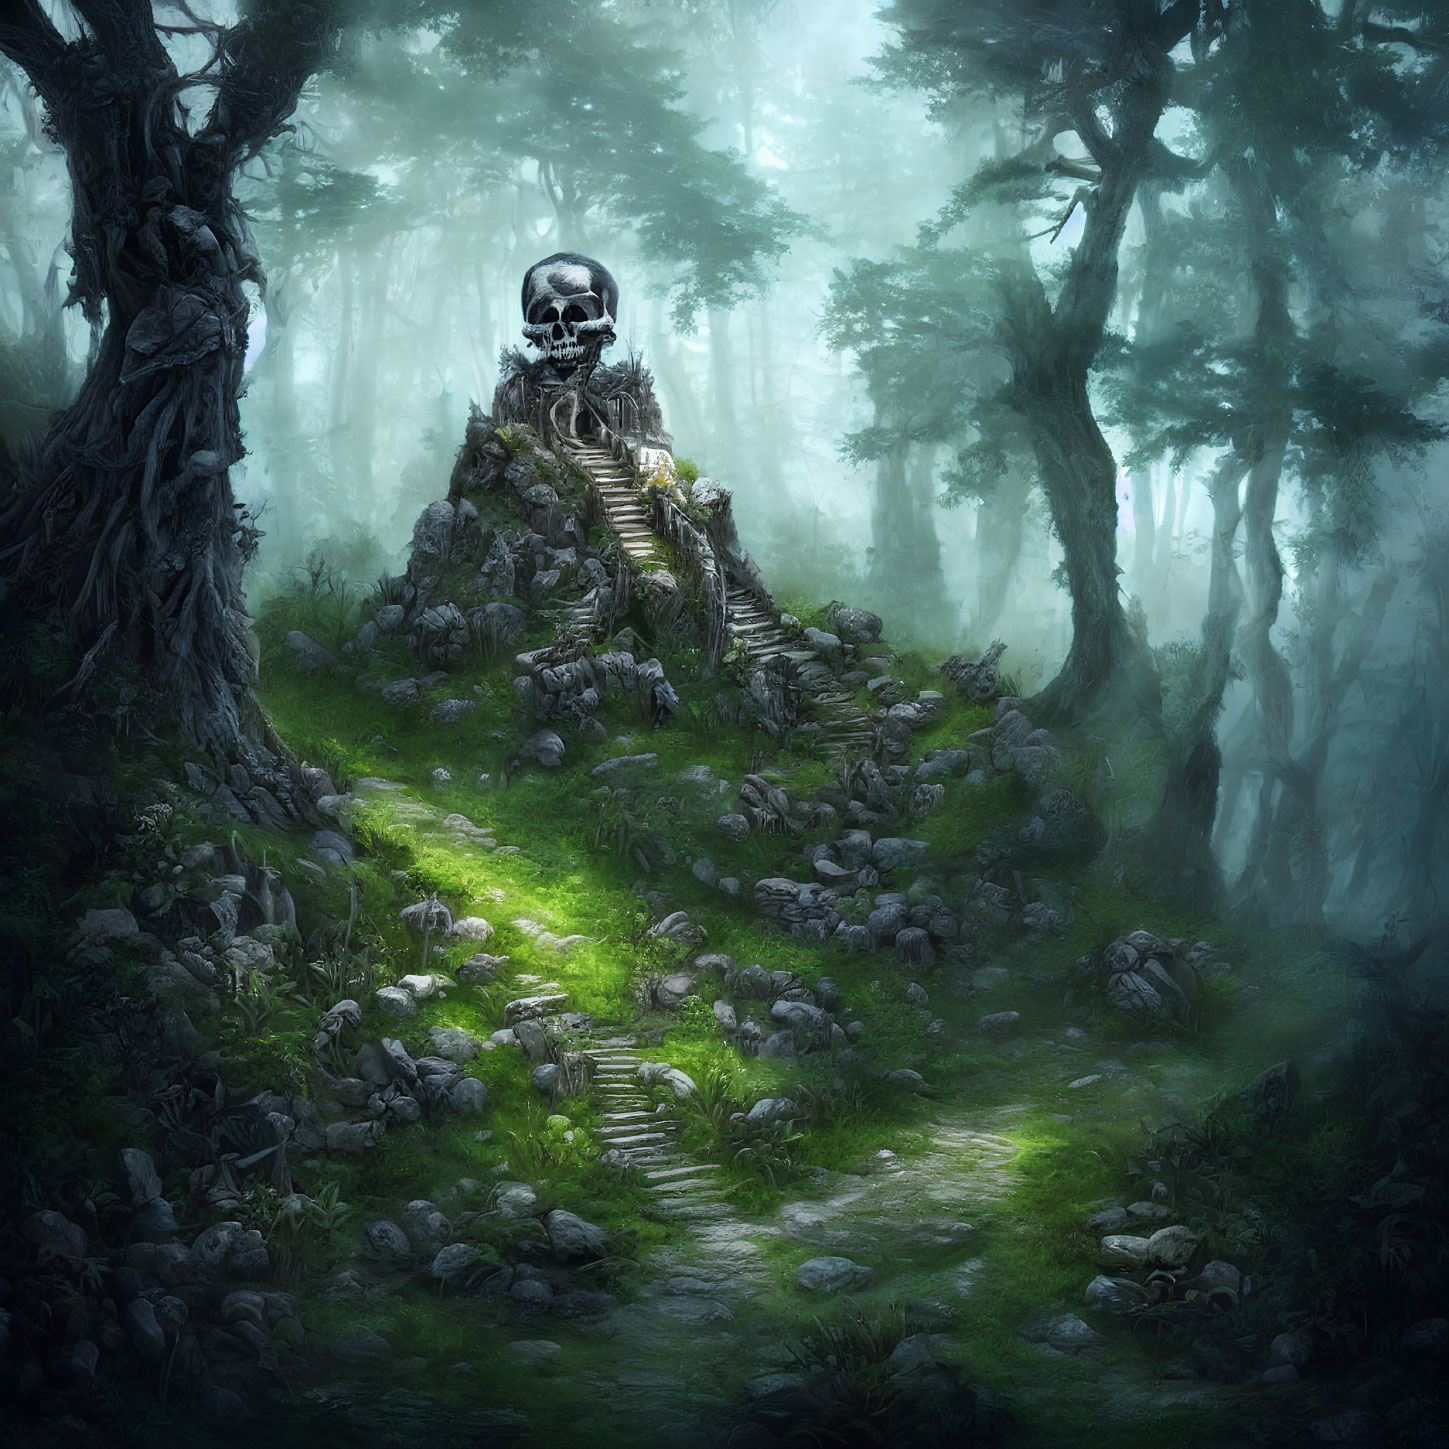 Misty forest with skull-shaped rock formation and stairway in ethereal light